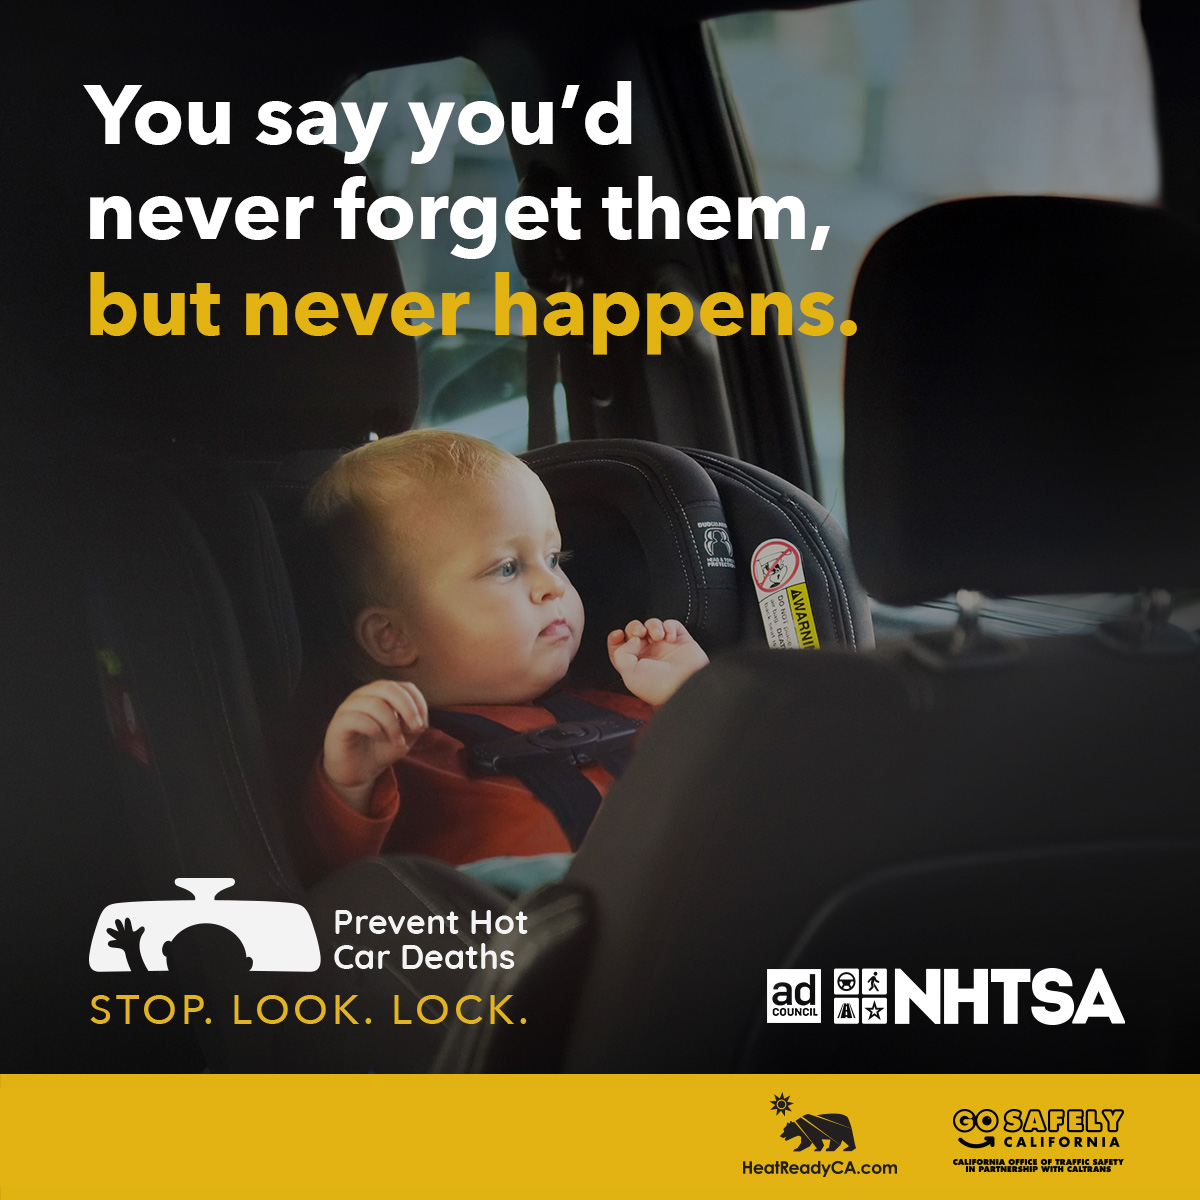 Parked cars get hot, fast – and so do children. Always check the back seat before leaving your car. Visit HeatReadyCA.com to create a personalized extreme heat plan for your family. #StopLookLock #PreventHotCarDeaths